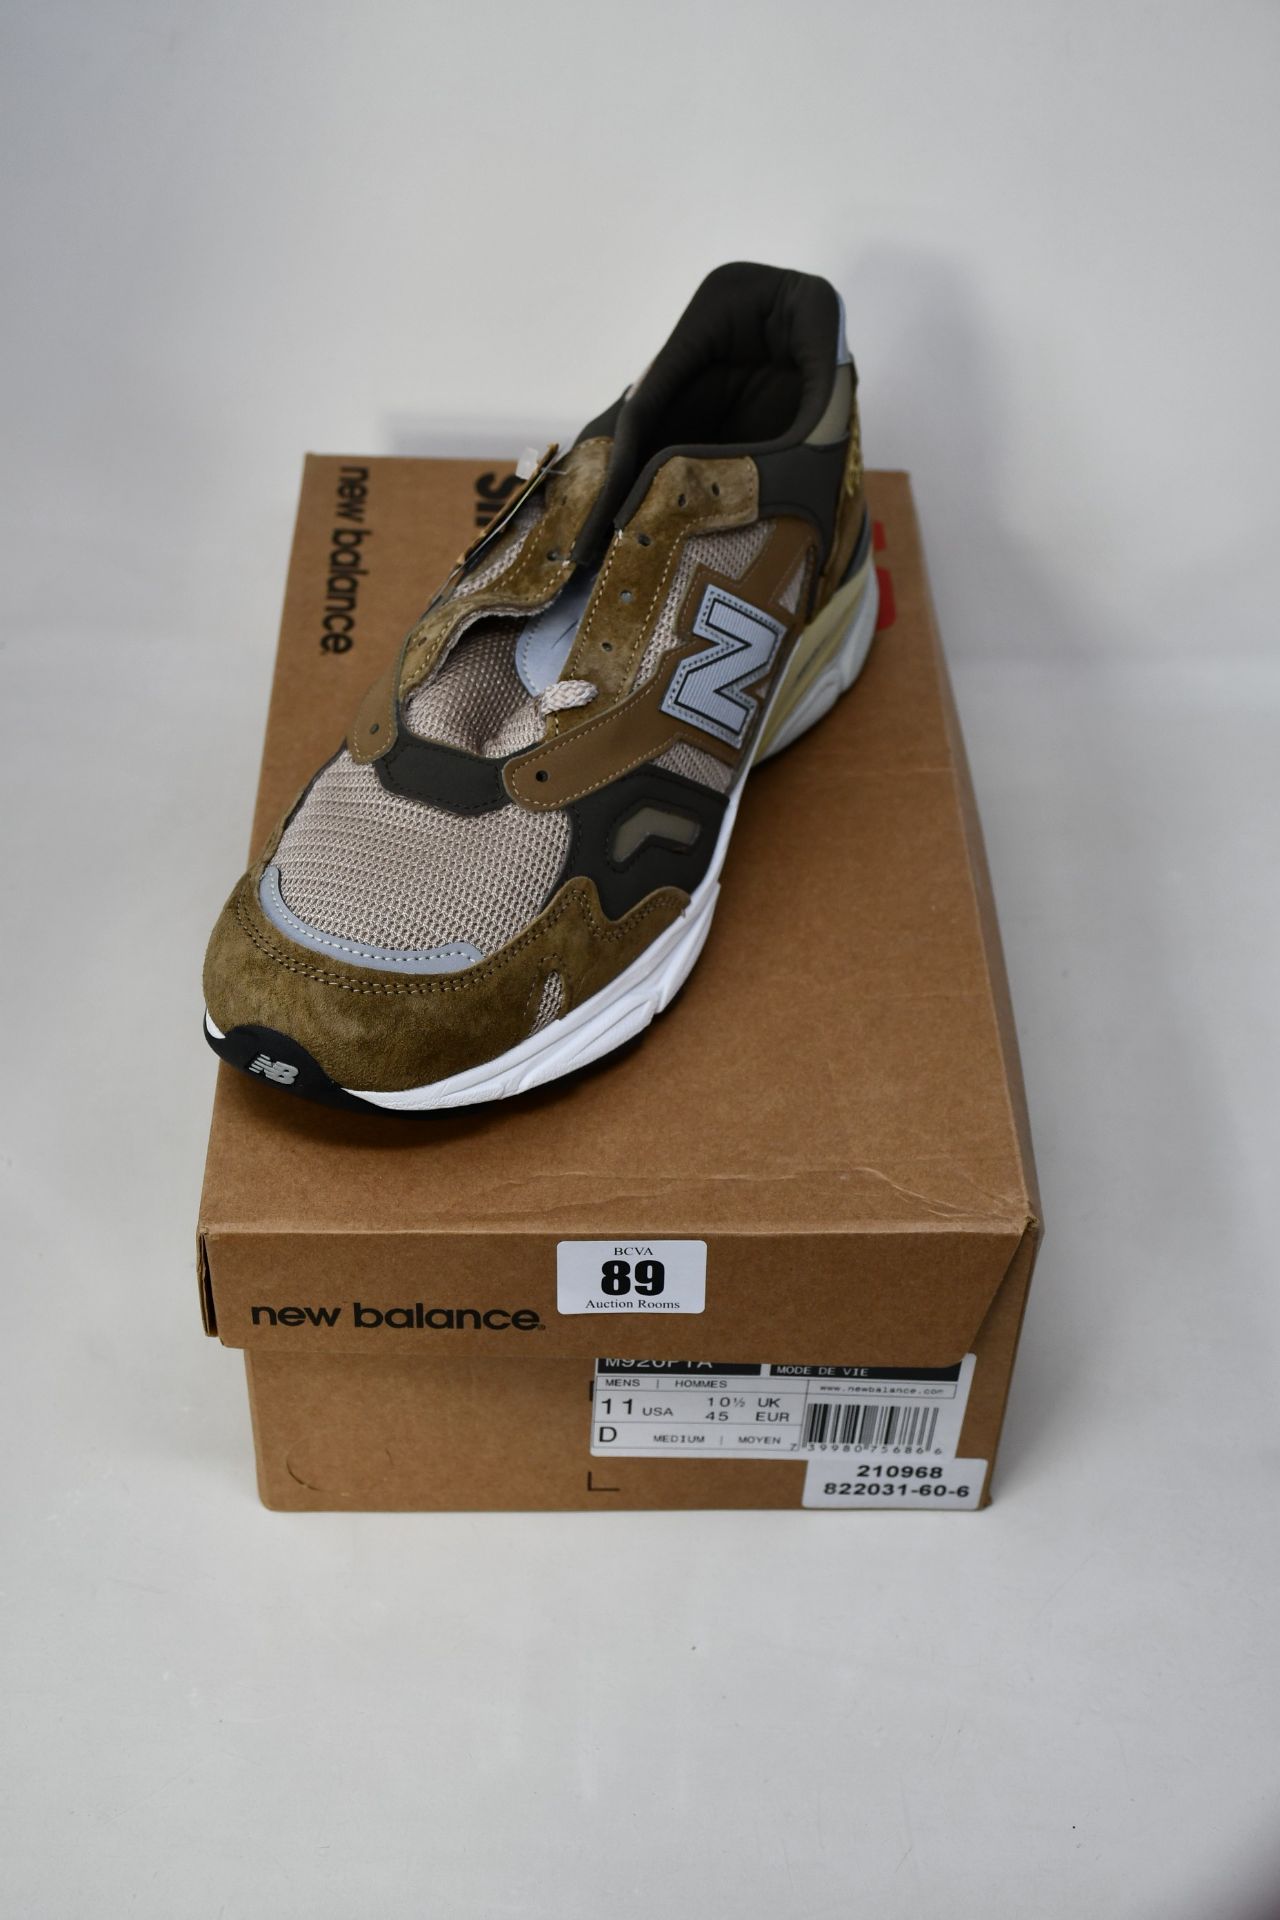 A pair of as new Patta x New Balance 920 trainers (UK 10.5).